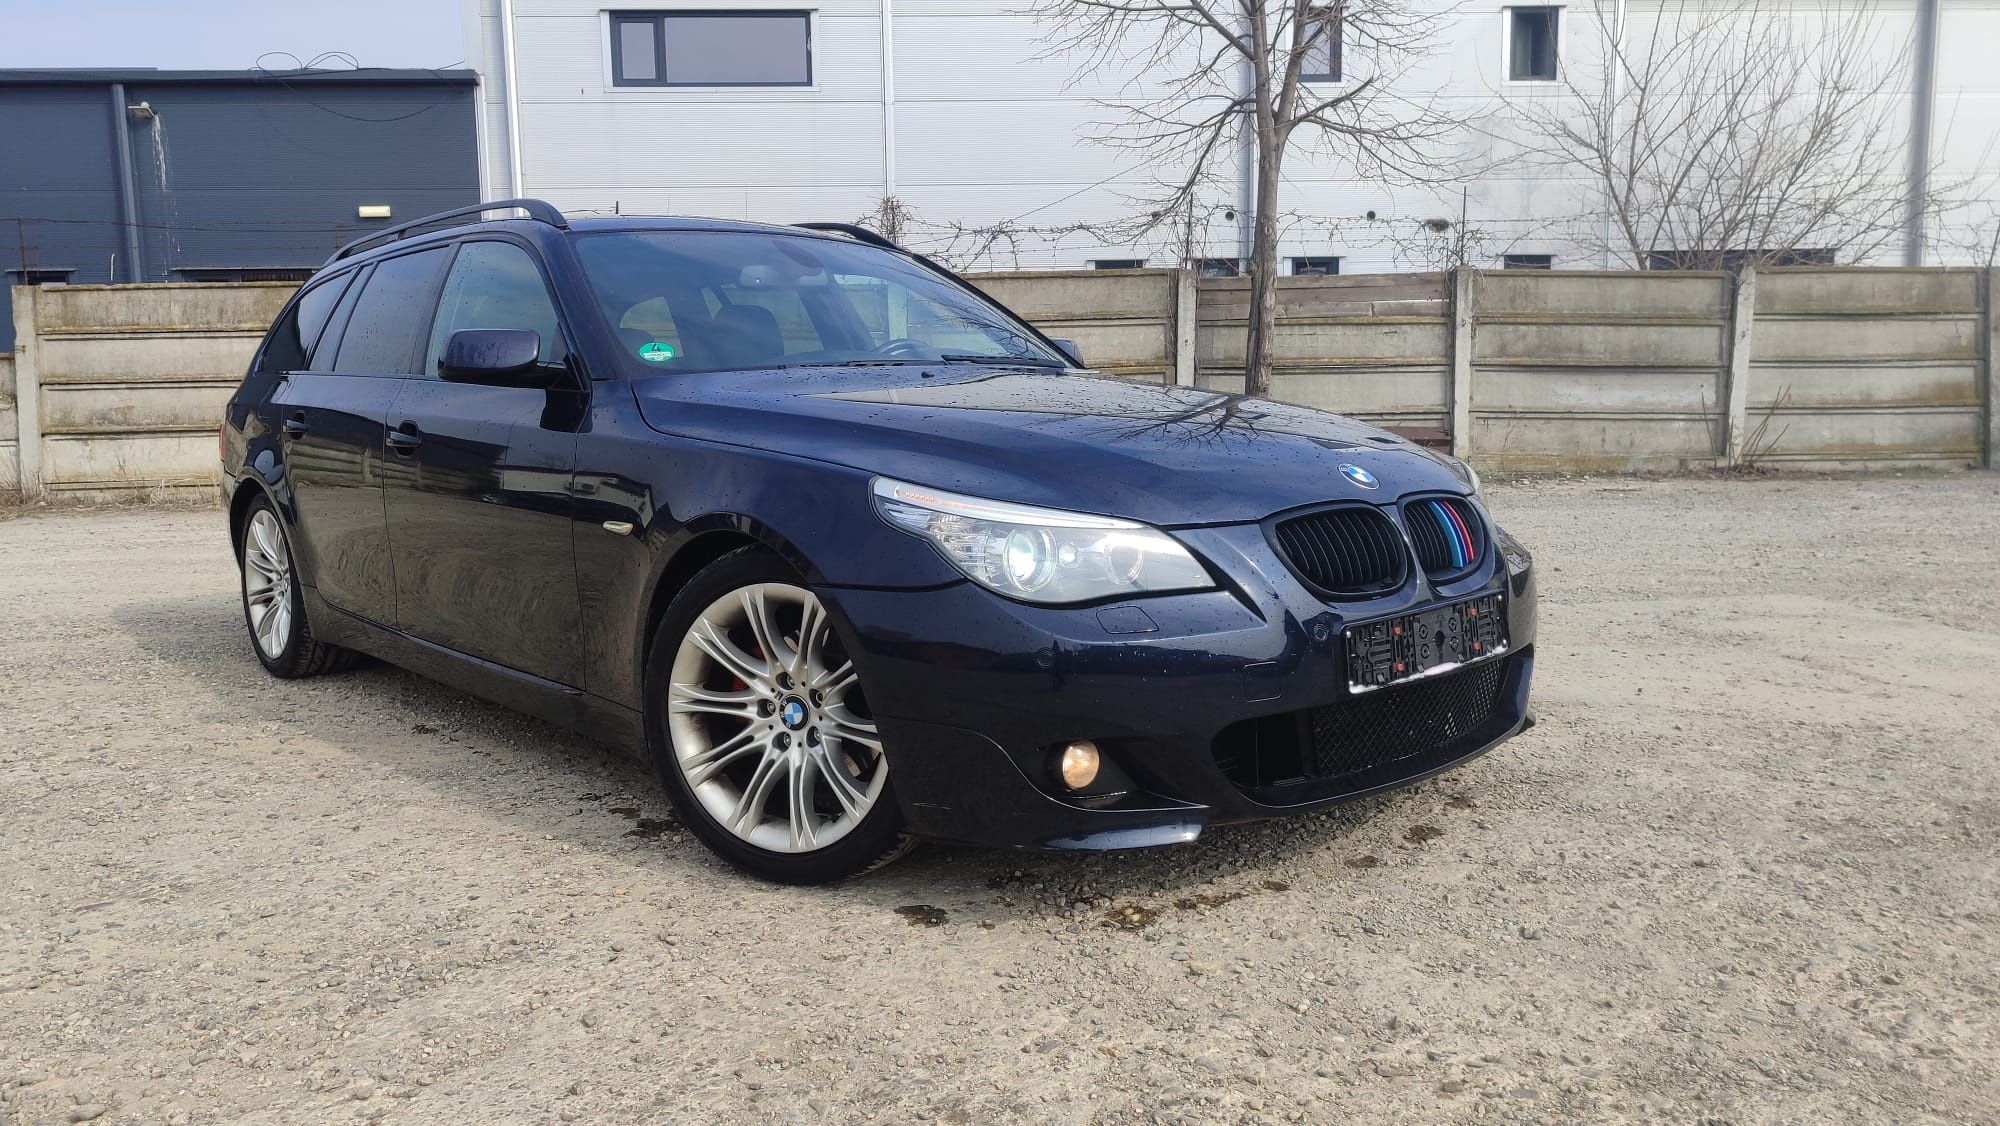 BMW 520 M packet 2008,163 ps